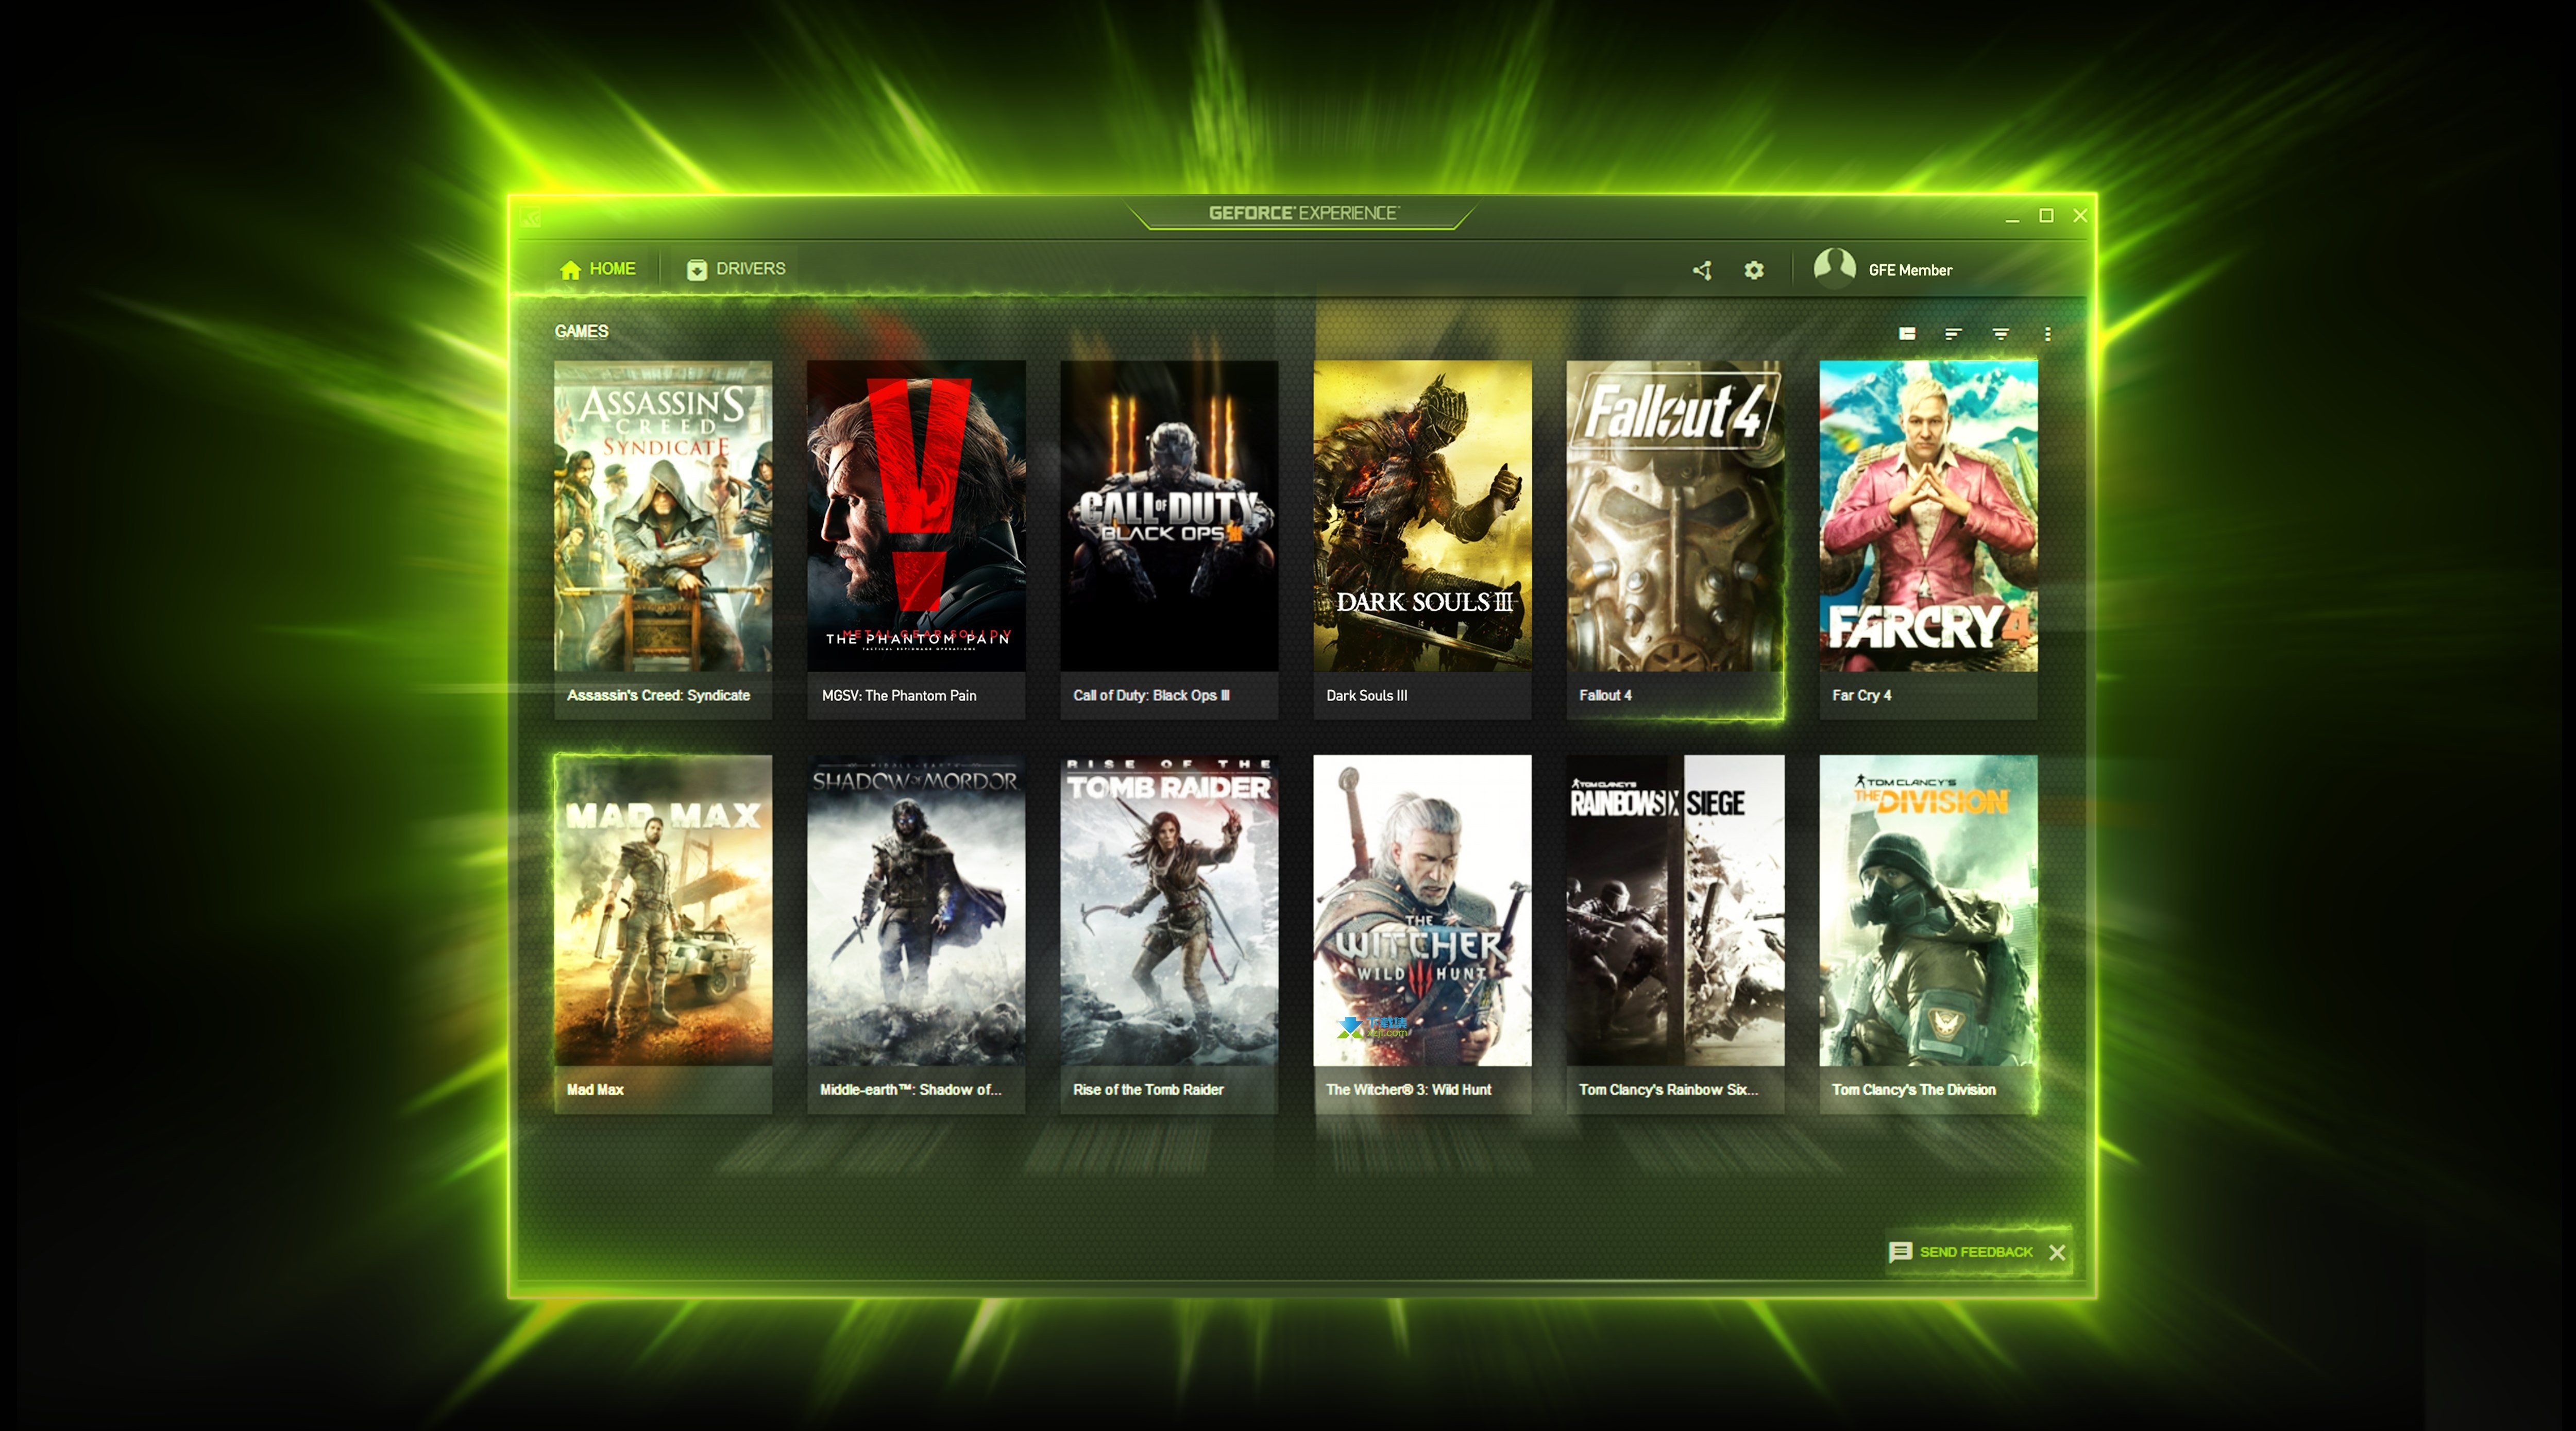 NVIDIA GeForce Experience界面